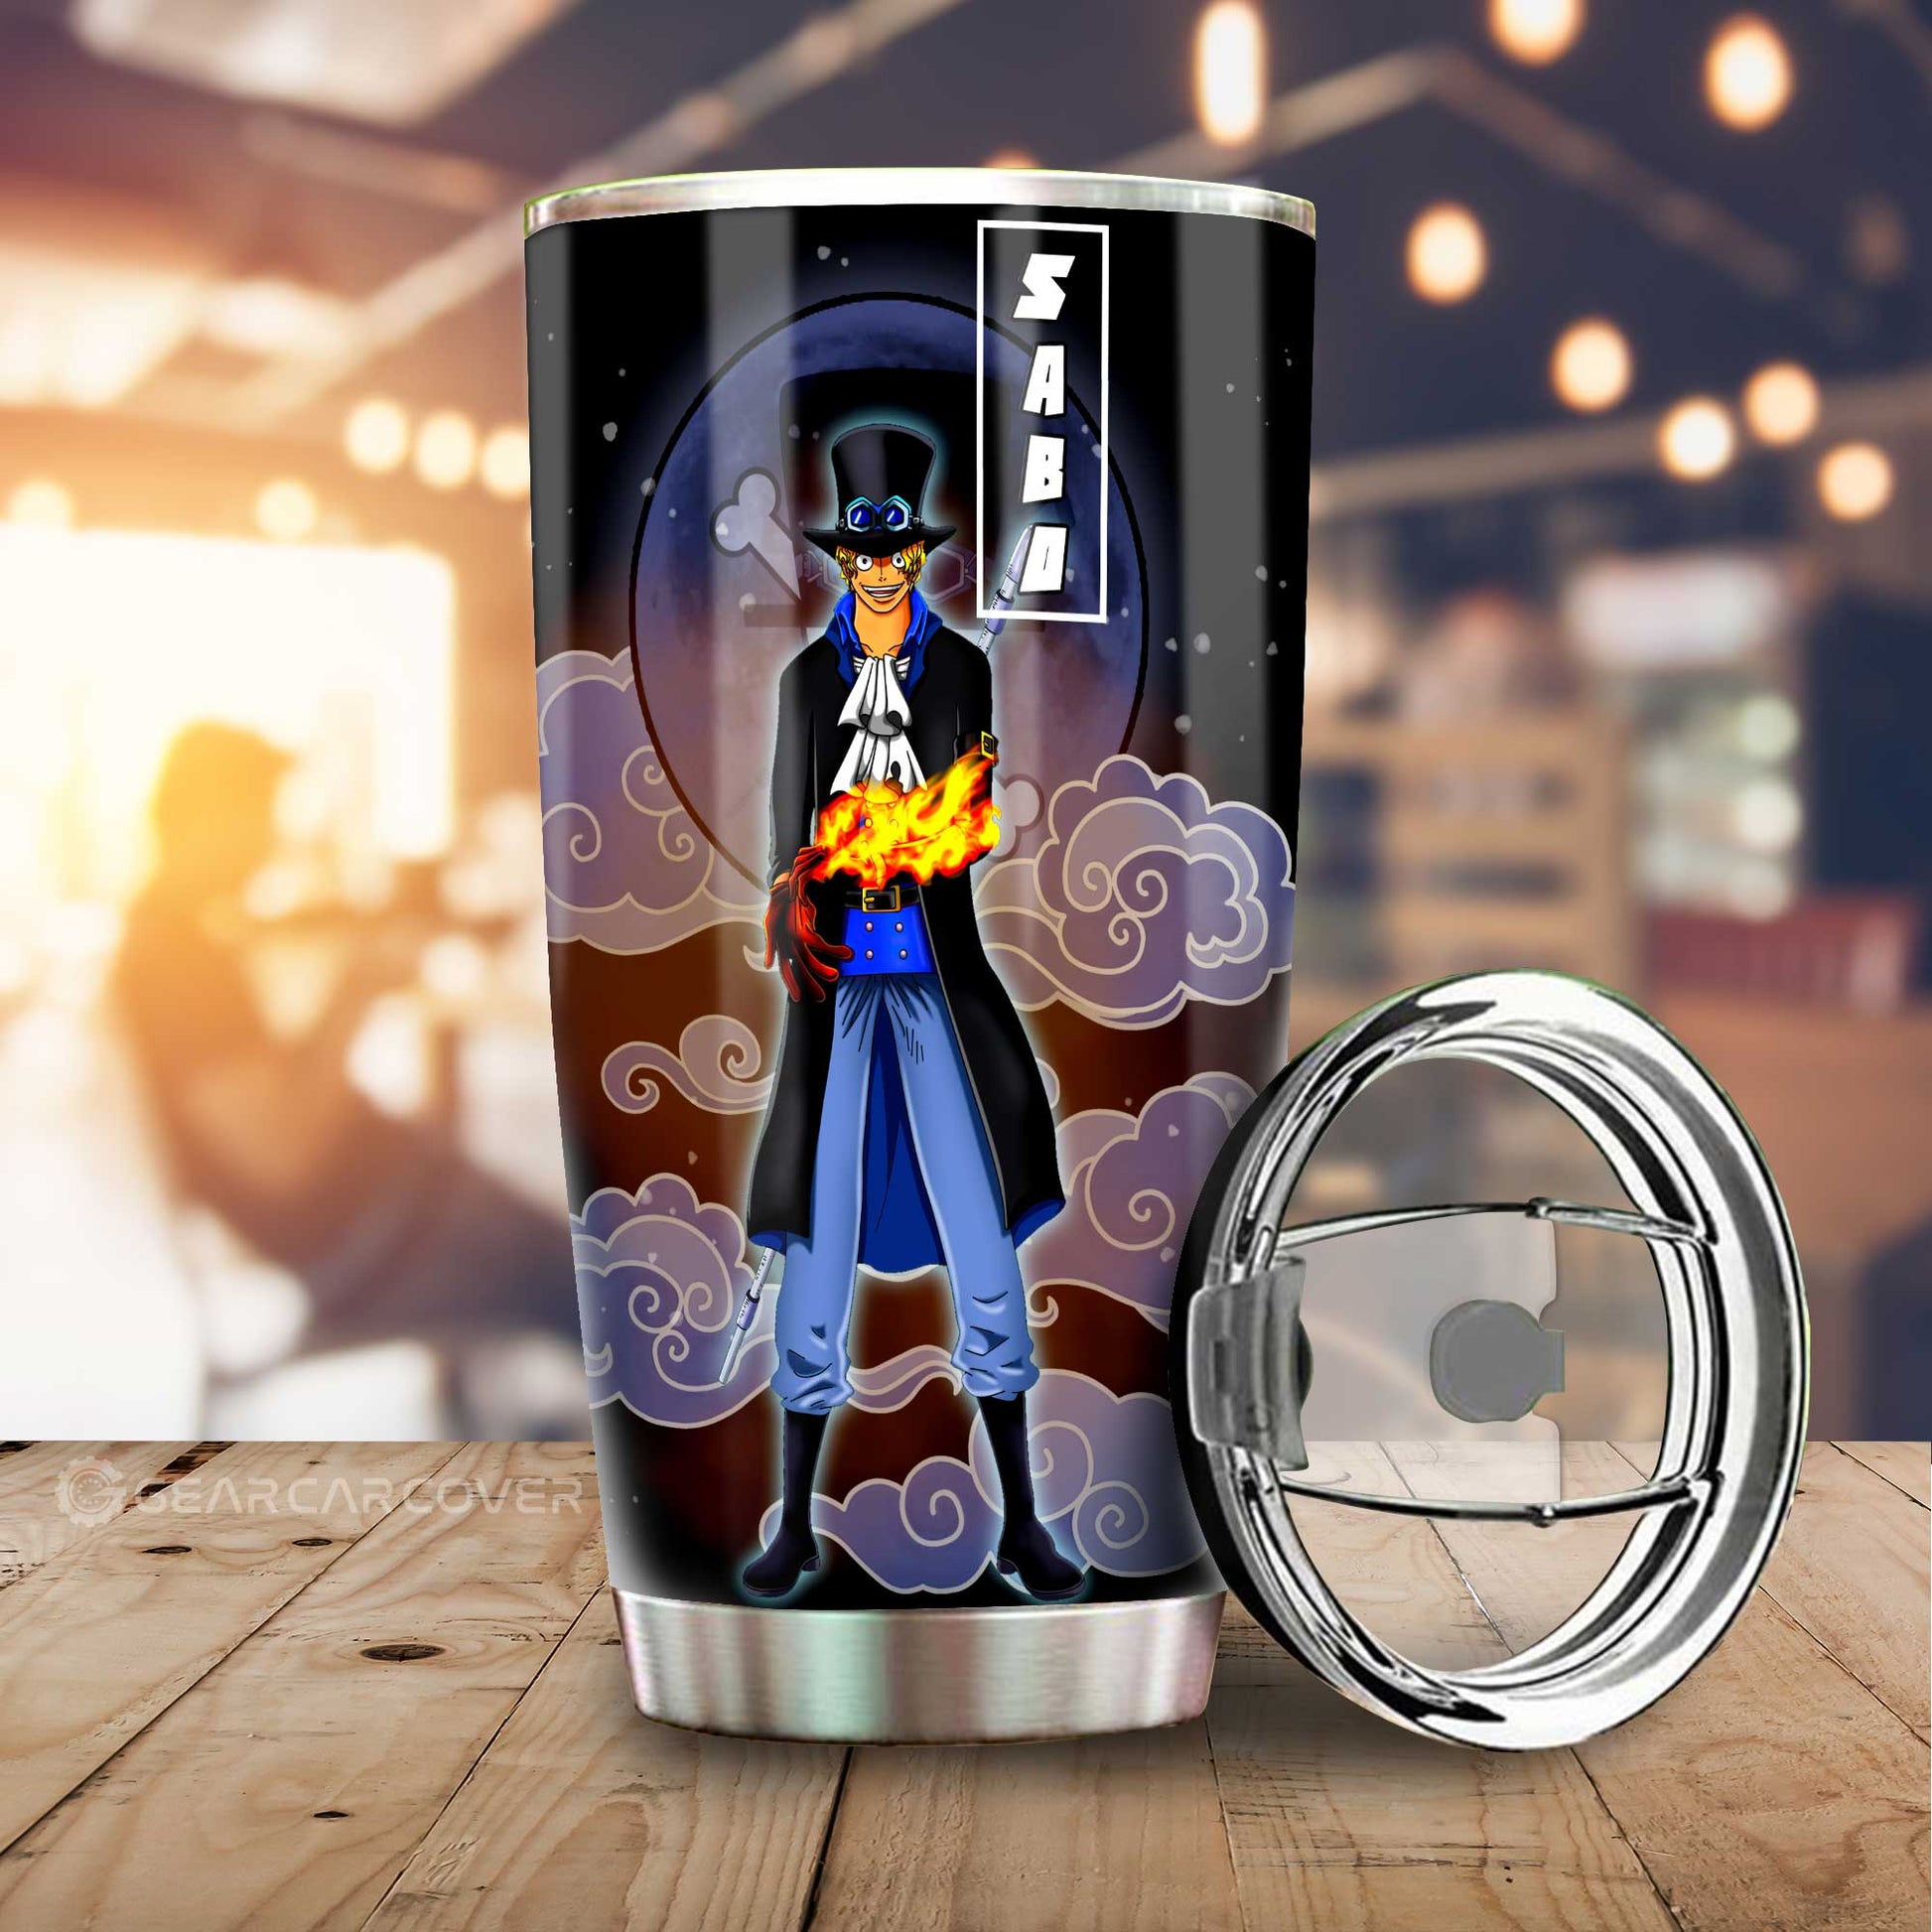 Sabo Tumbler Cup Custom For One Piece Anime Fans - Gearcarcover - 1